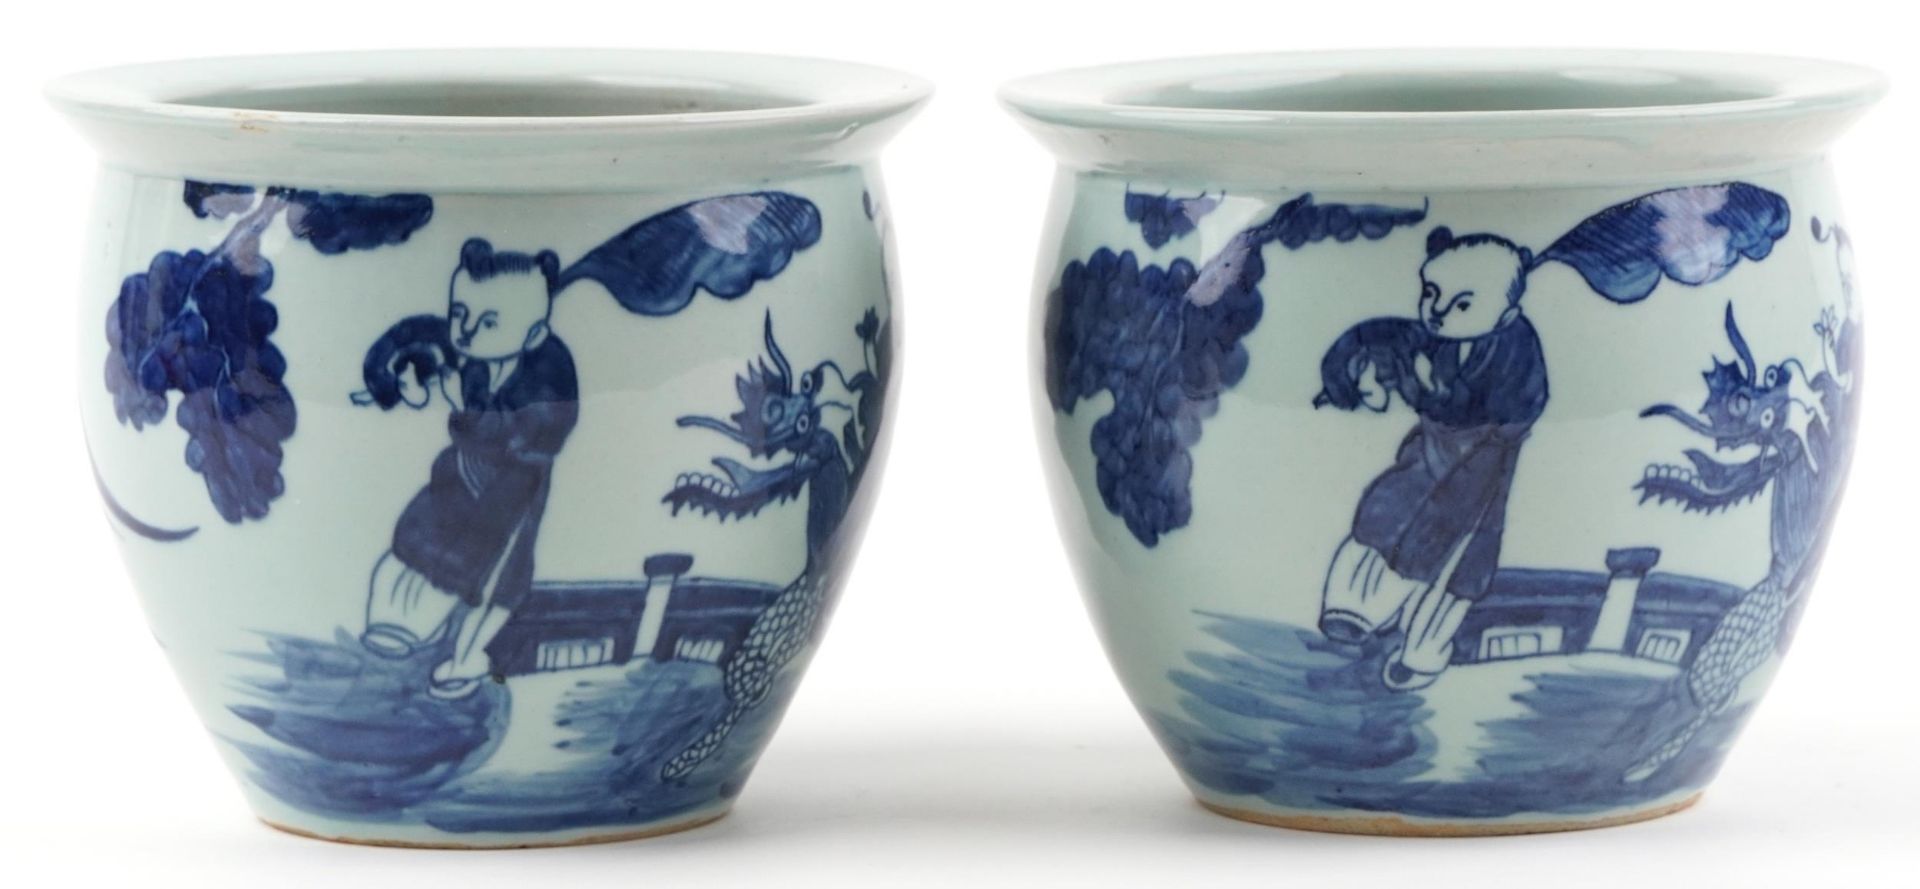 Pair of Chinese blue and white porcelain jardinieres painted with children playing in a palace - Image 4 of 6